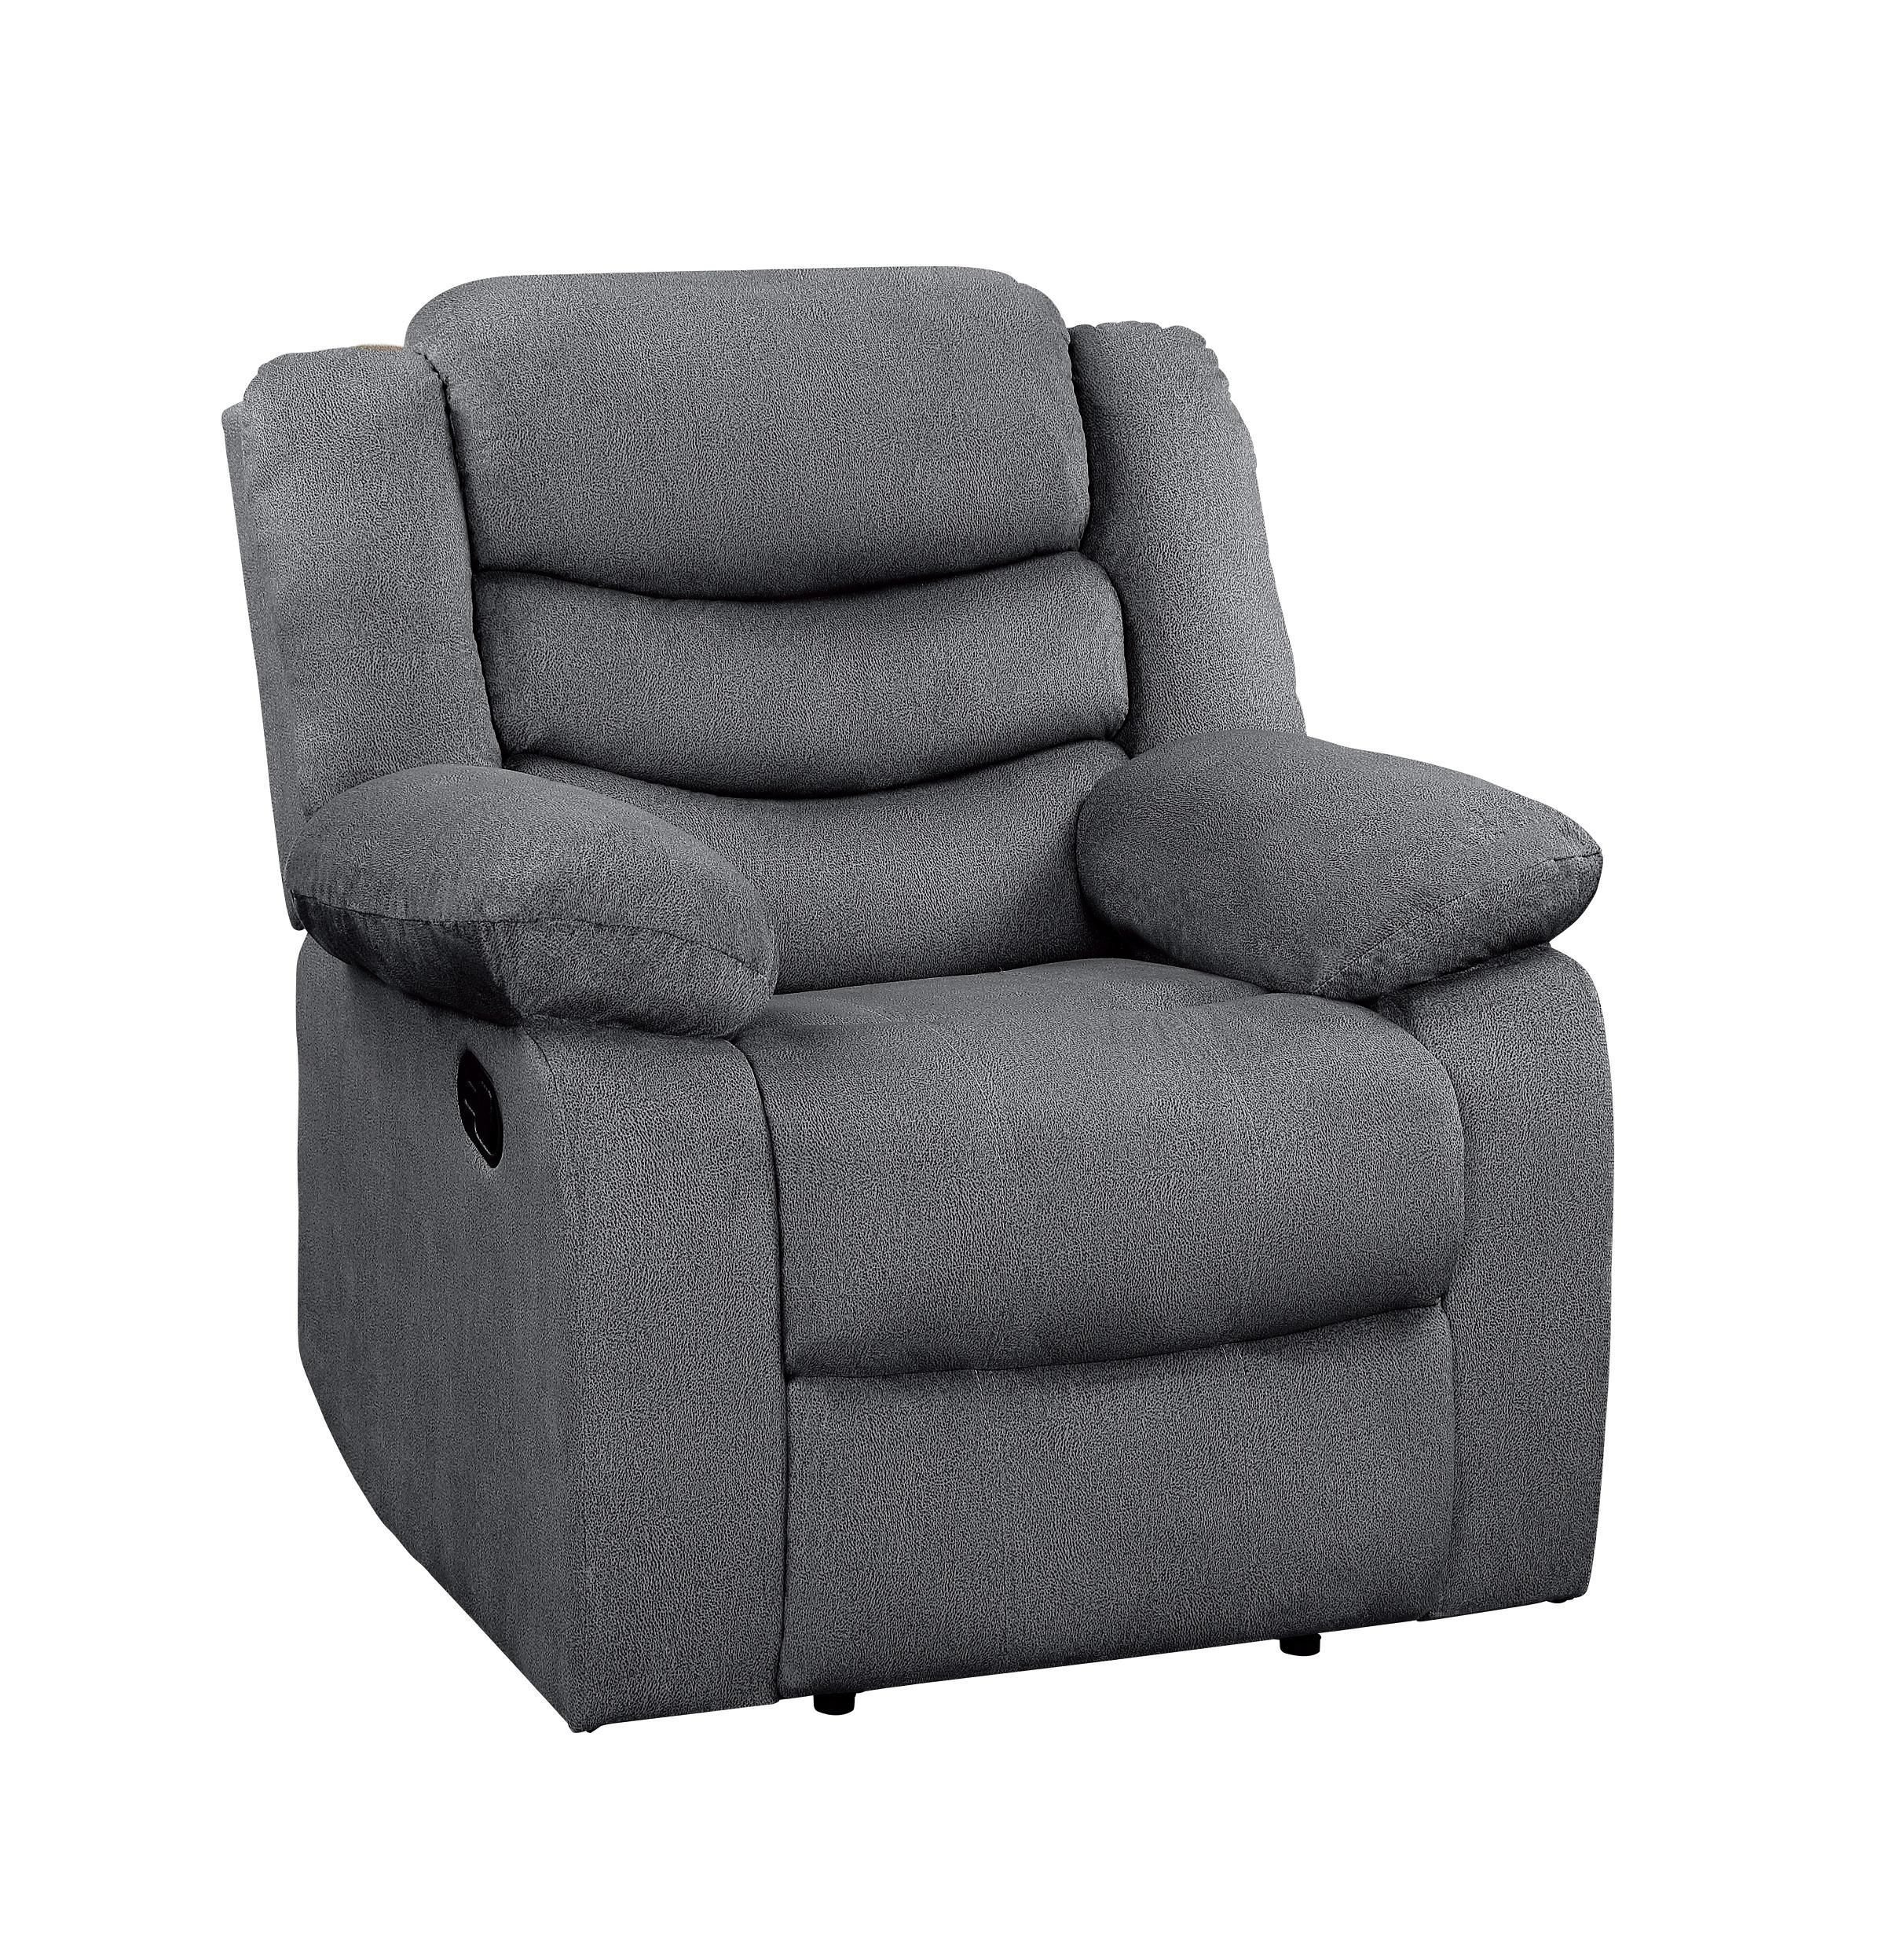 

    
Transitional Gray Microfiber Reclining Chair Homelegance 9526GY-1 Discus
